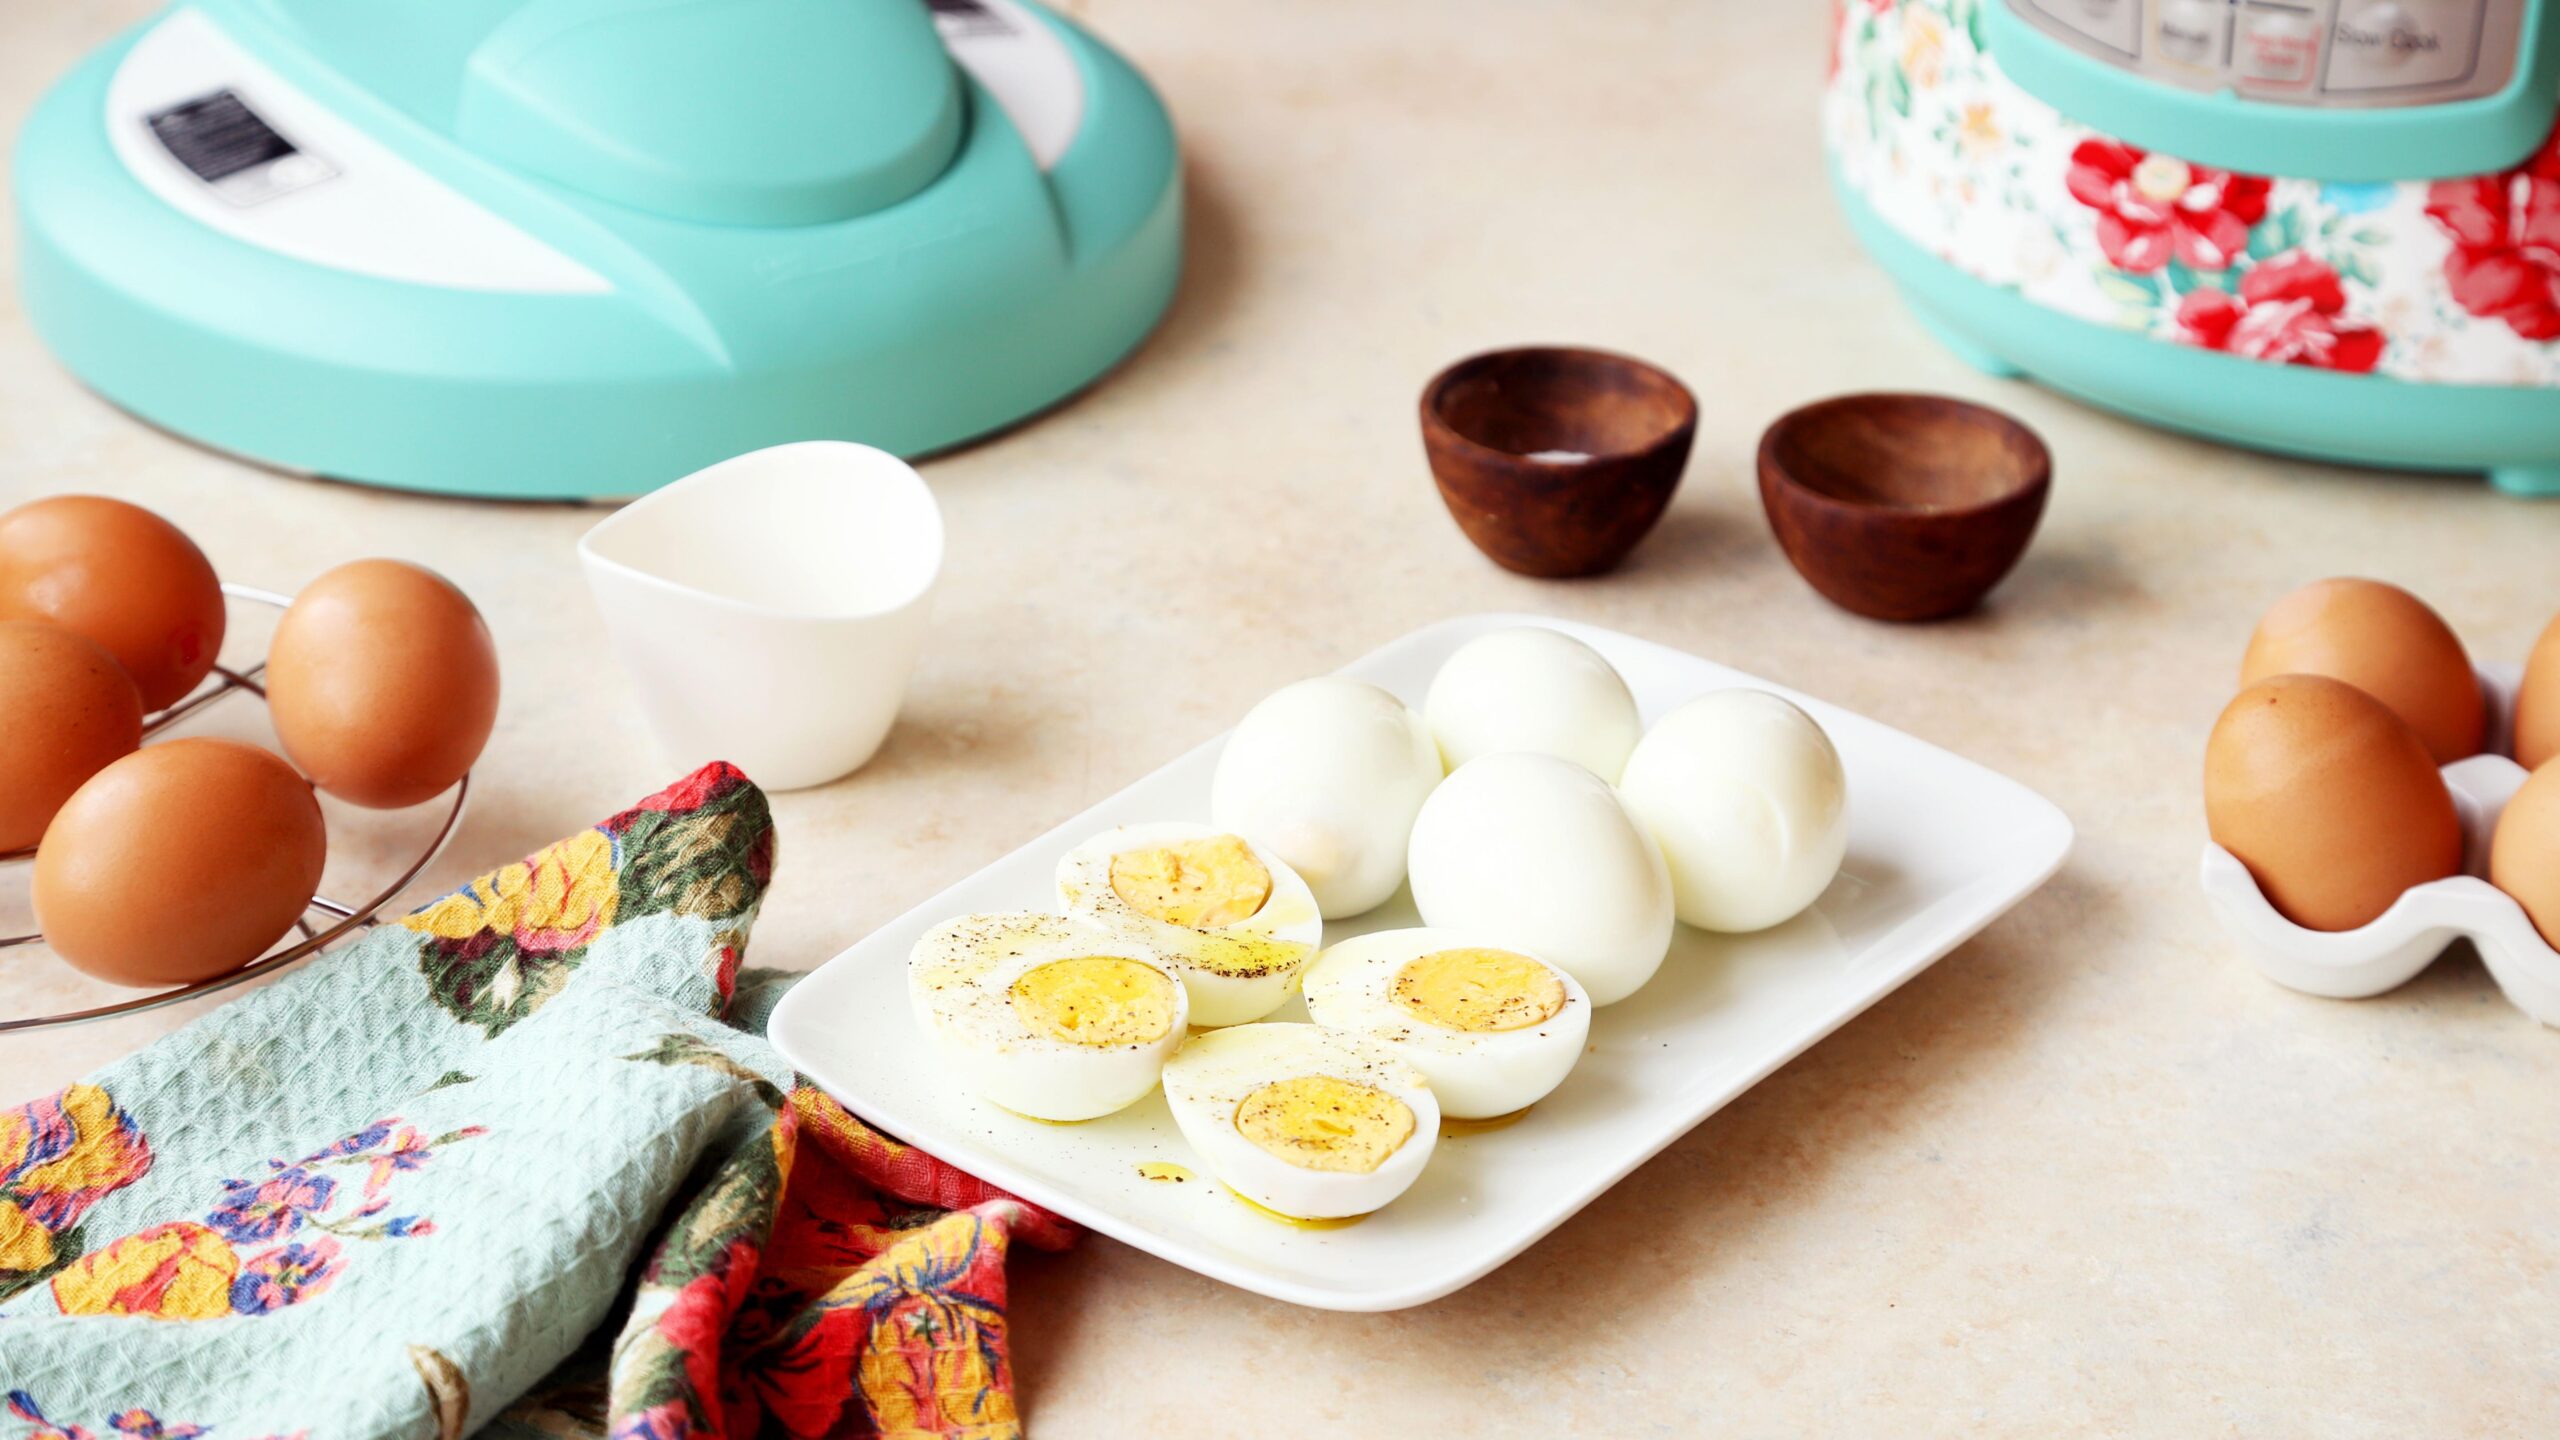  With this Instant Pot recipe, you can easily cook a dozen eggs at once.